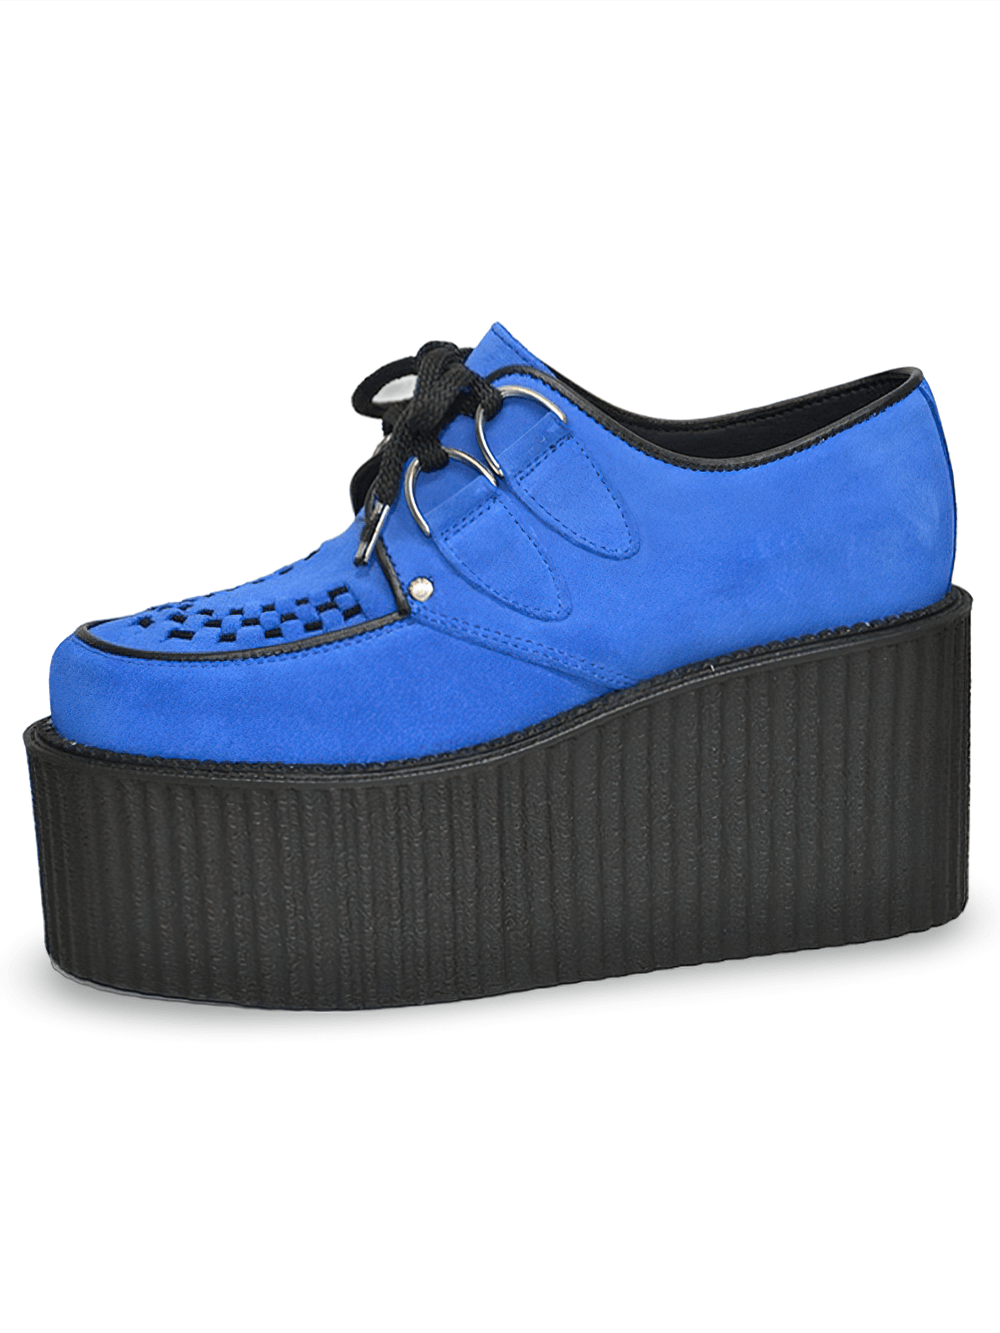 Fashion Blue Suede Triple Sole Creepers With Lace-Up